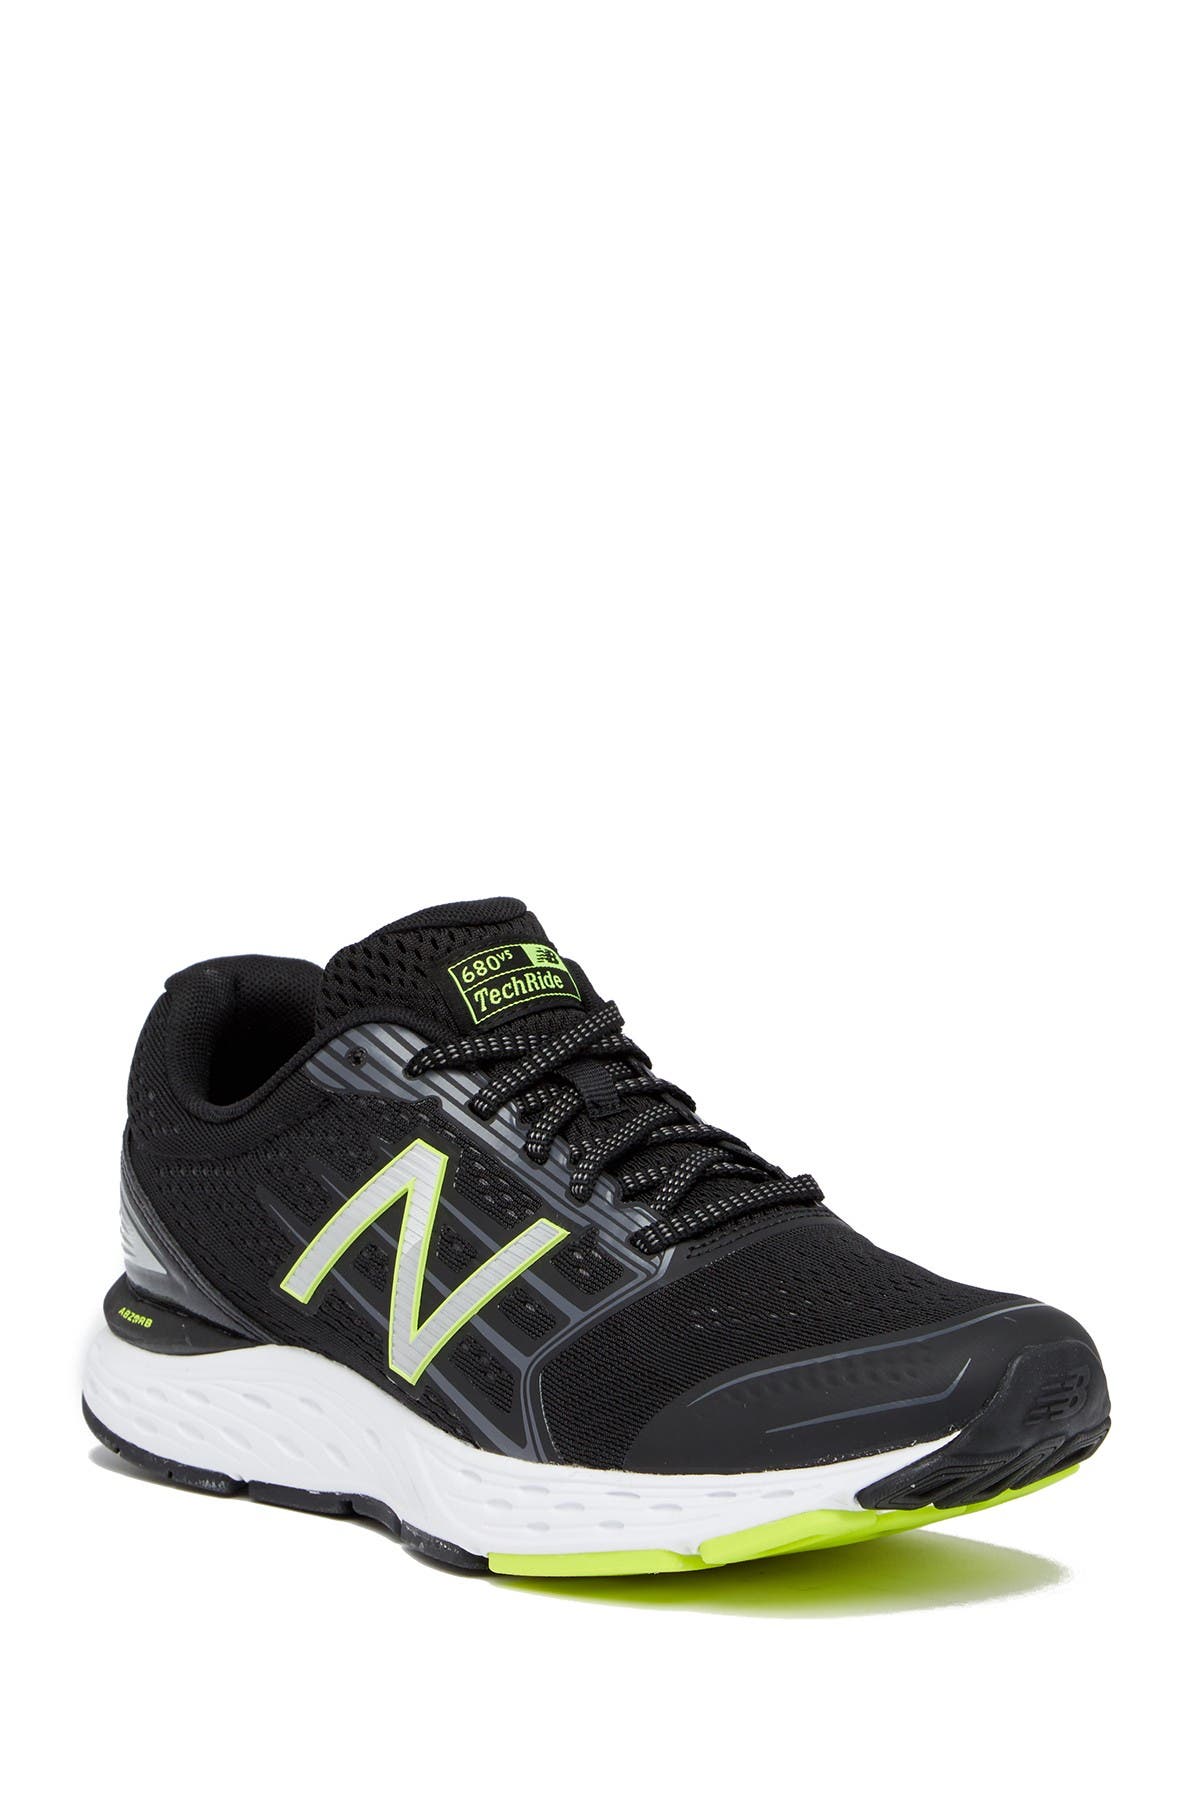 new balance womens shoes wide width